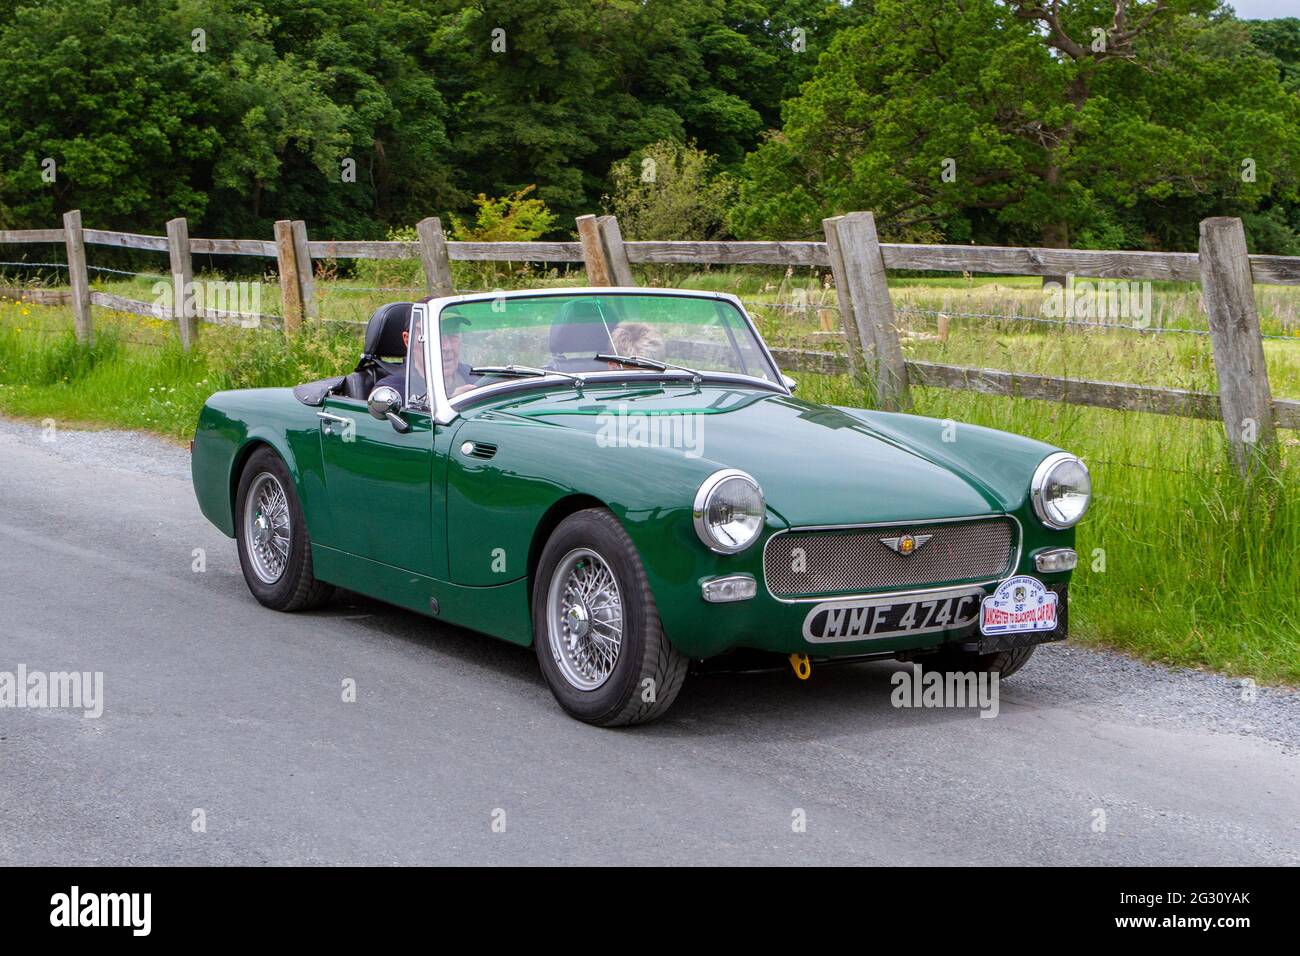 1965 60s green Austin Healey at the 58th Annual Manchester to Blackpool Vintage & Classic Car Run The event is a ‘Touring Assembly’ Stock Photo